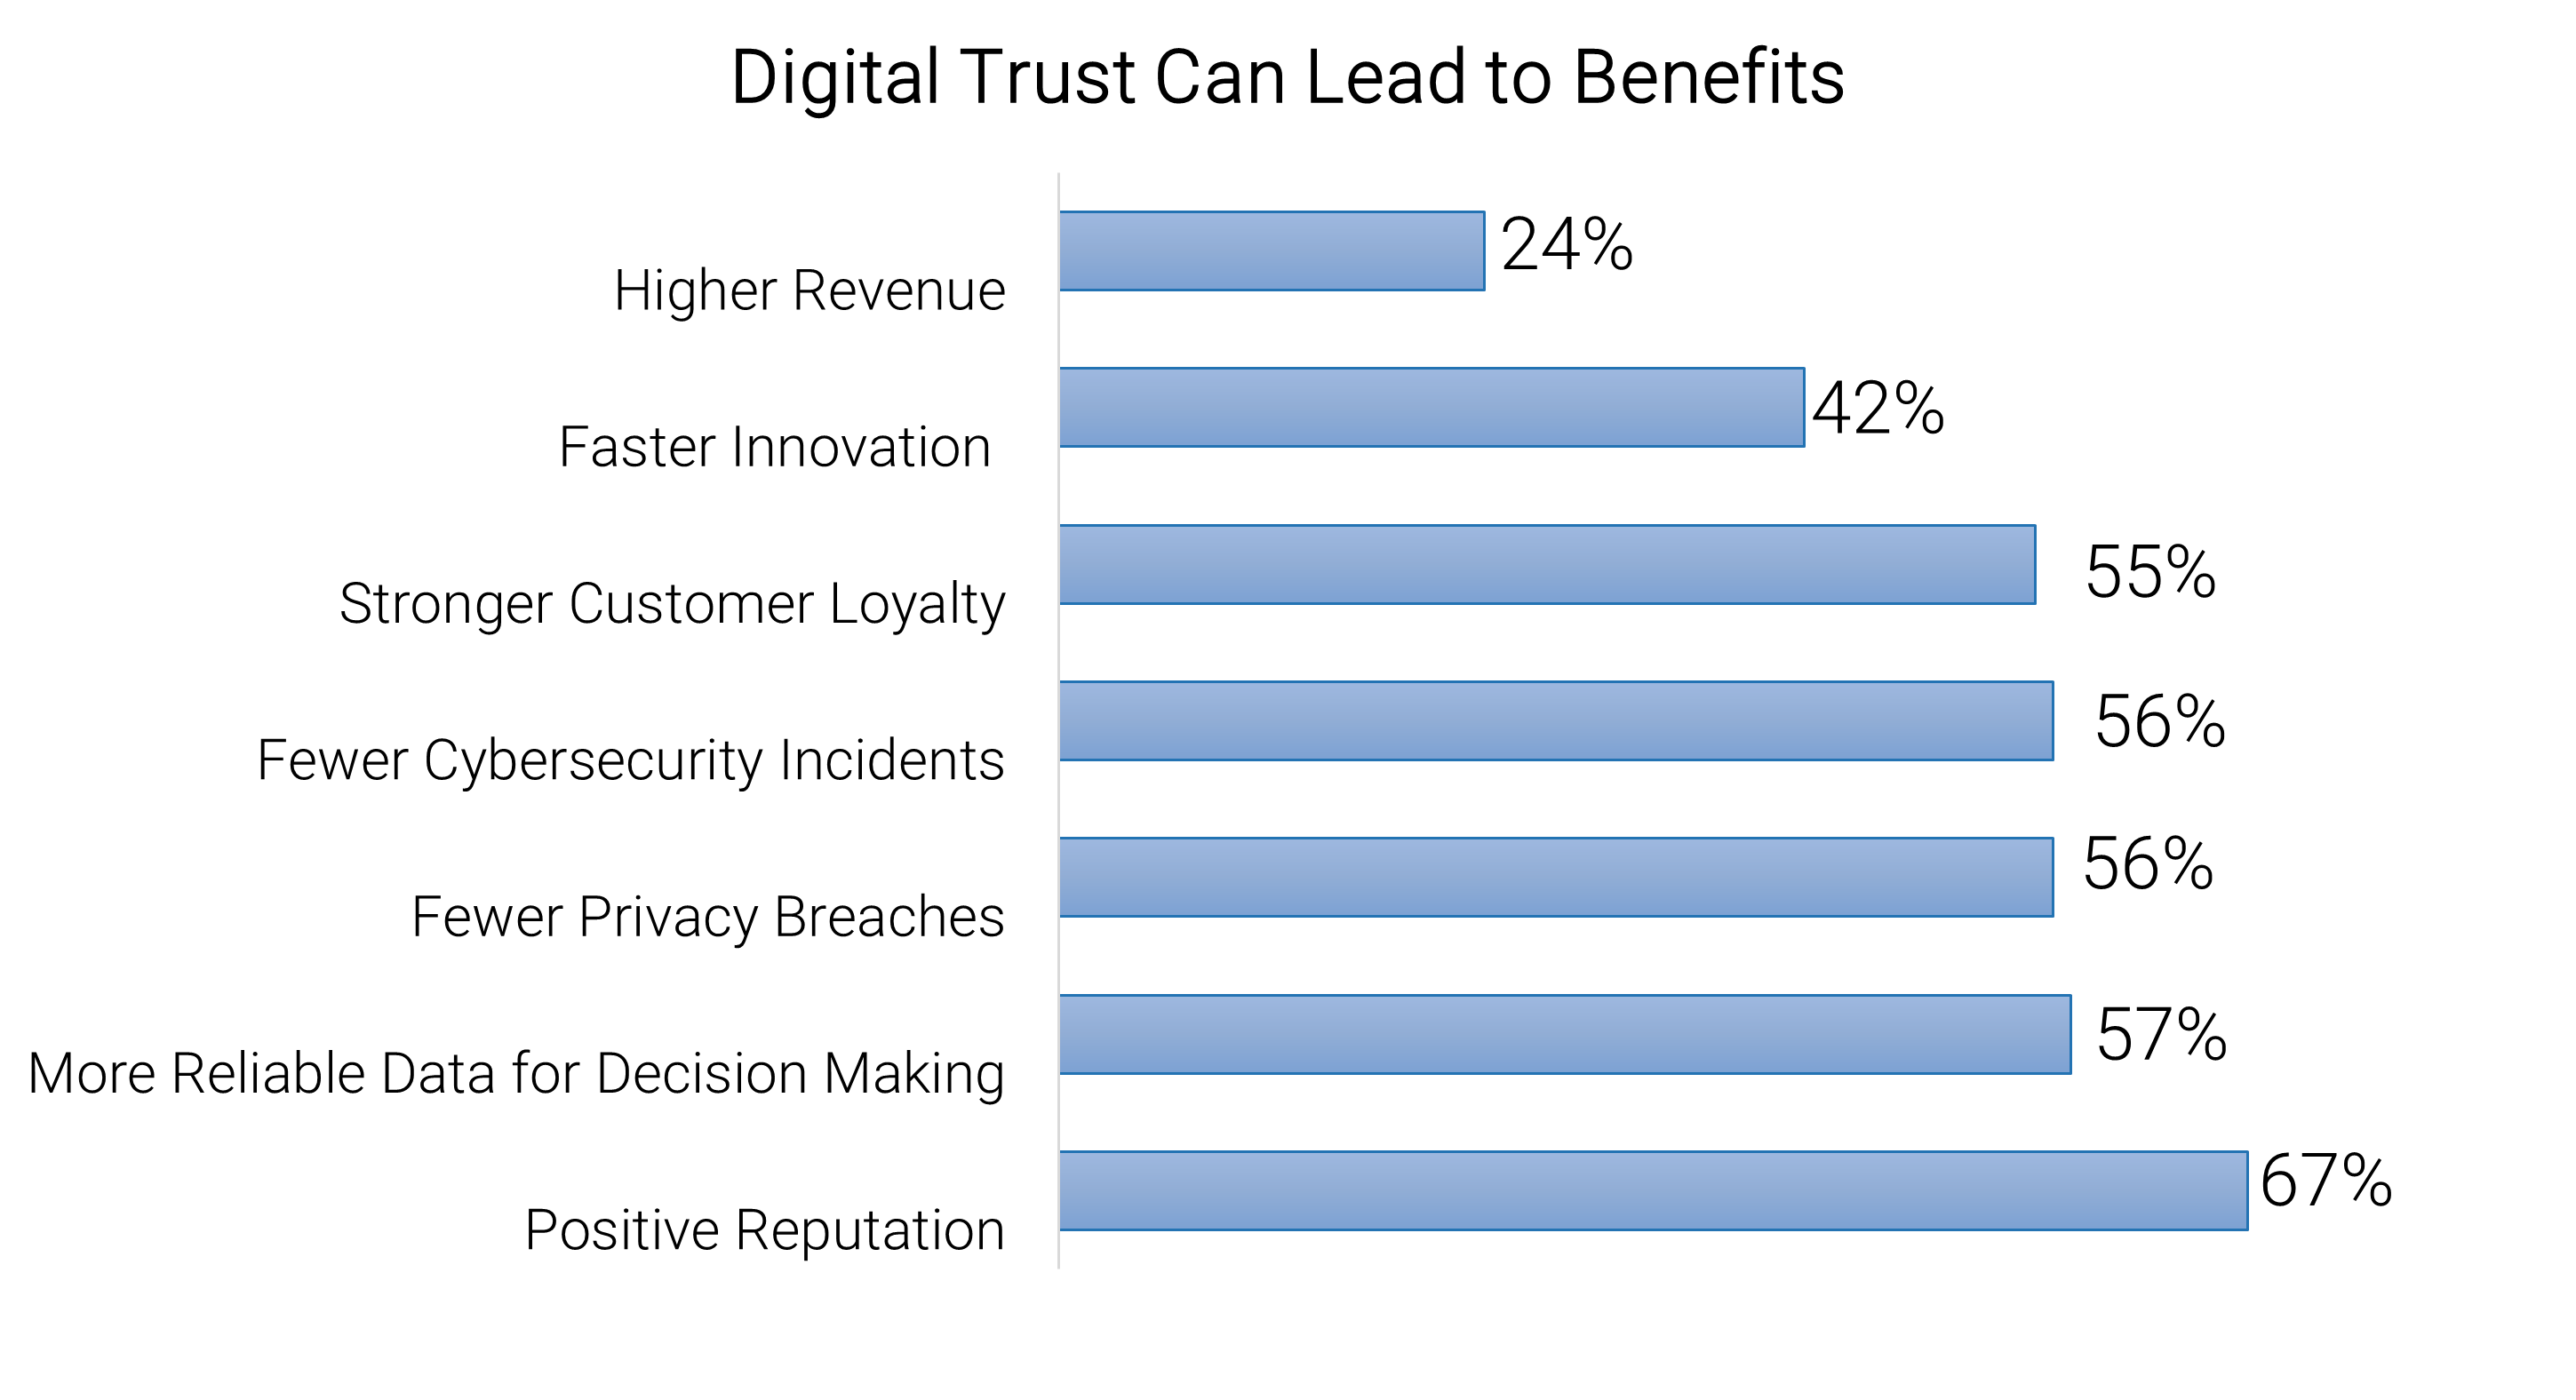 The image contains a screenshot of a graph that demonstrates the digital trust can lead to benefits.